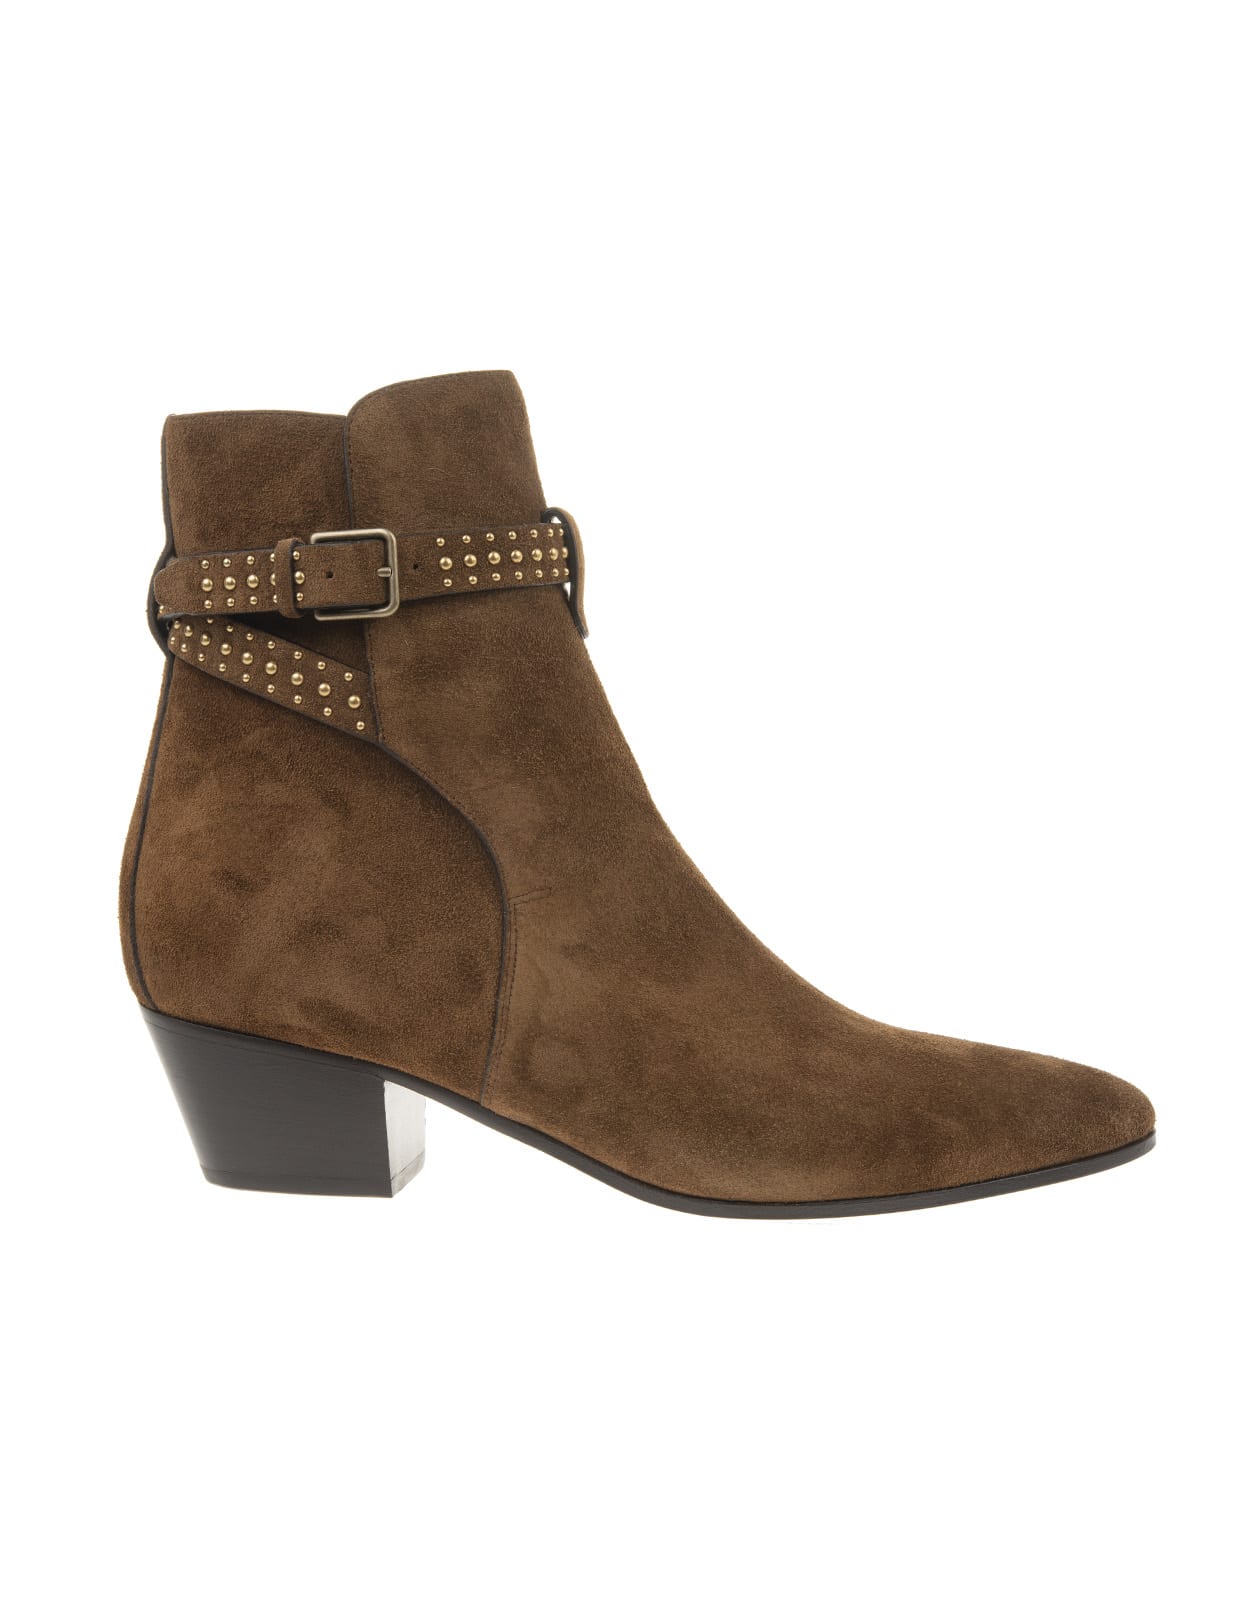 Buy Saint Laurent Jodhpur West Ankle Boot In Brown Suede With Studs online, shop Saint Laurent shoes with free shipping